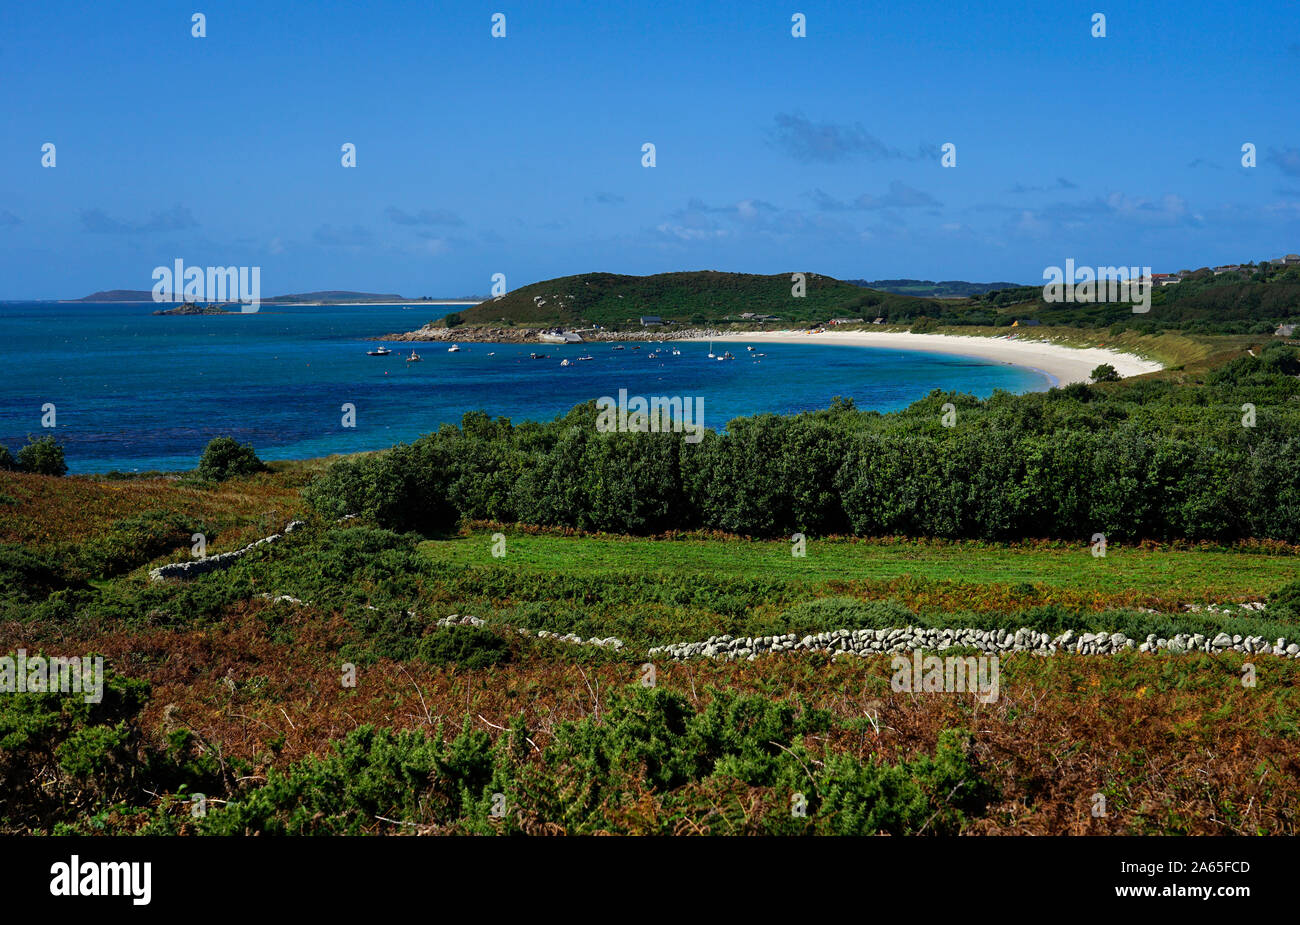 St Martin's,Isole Scilly, Inghilterra, Europa Foto Stock